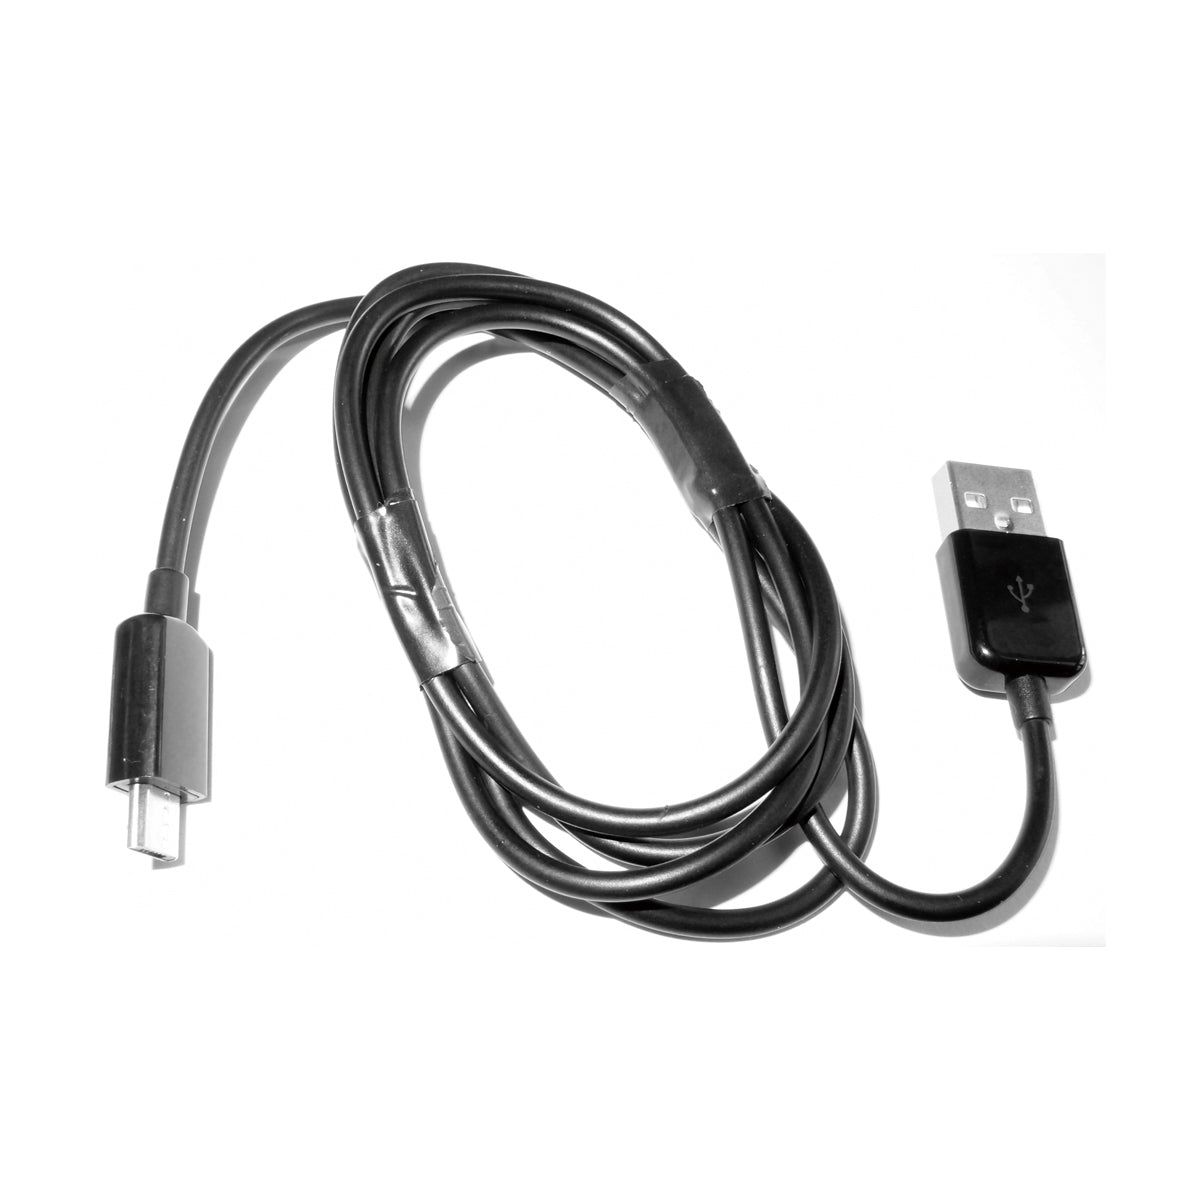 1m Charging & Data Cable - USB2.0 Male to Micro USB - Black